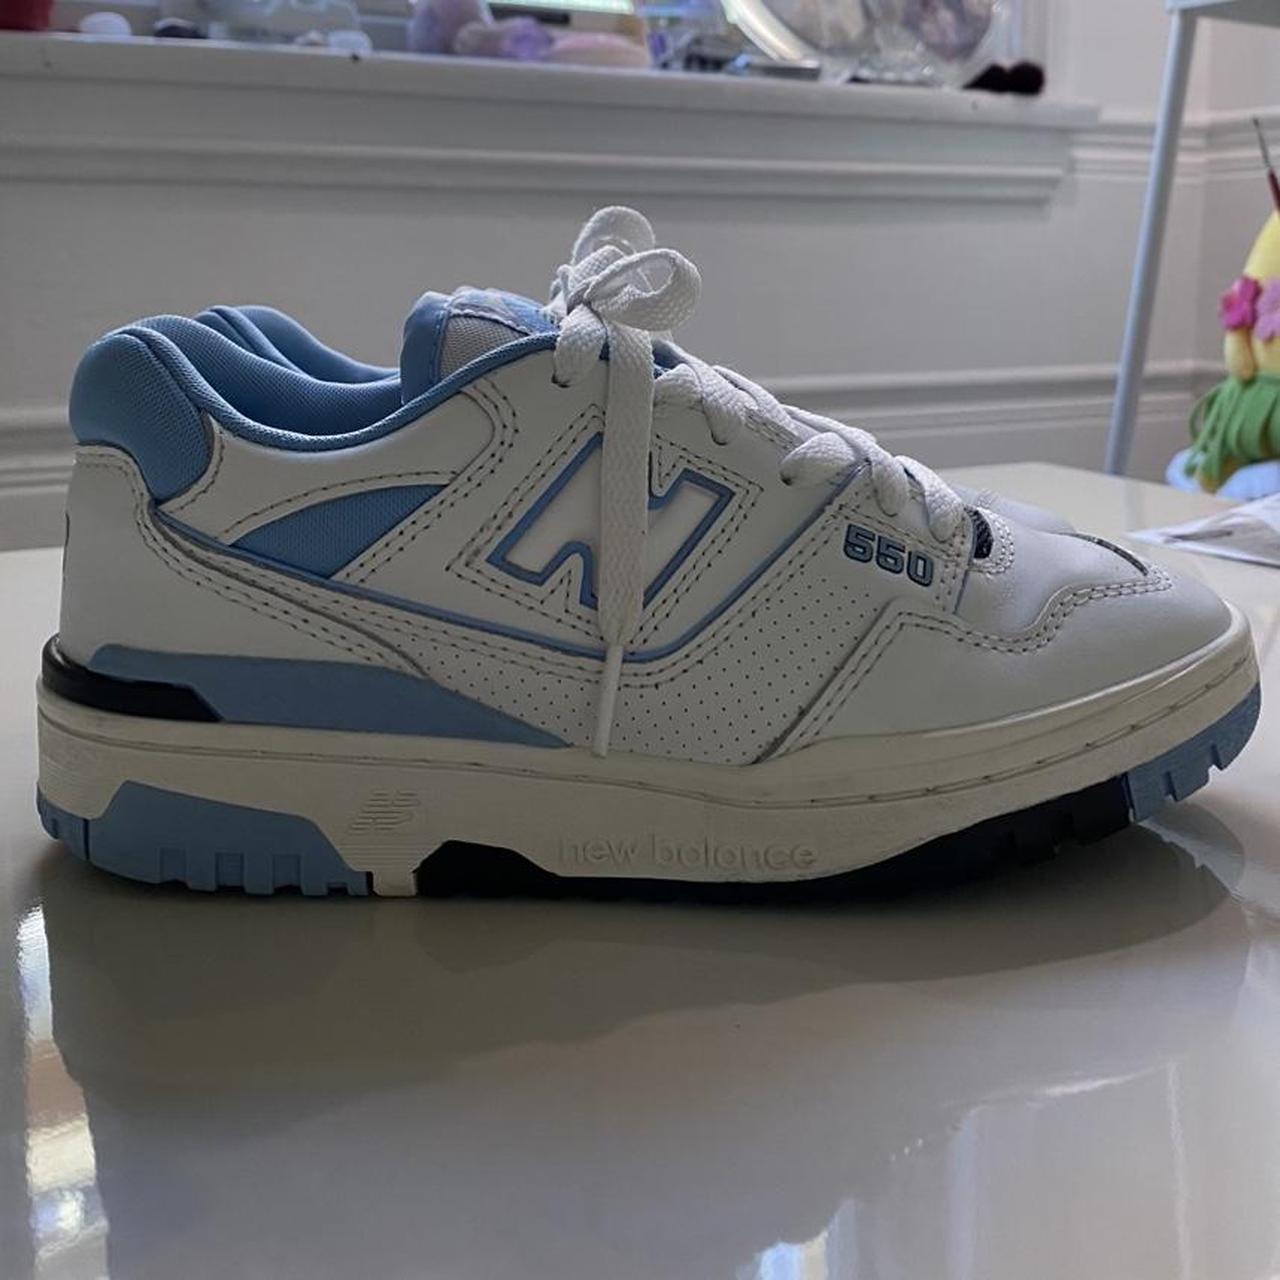 New Balance Women's Blue and White Trainers